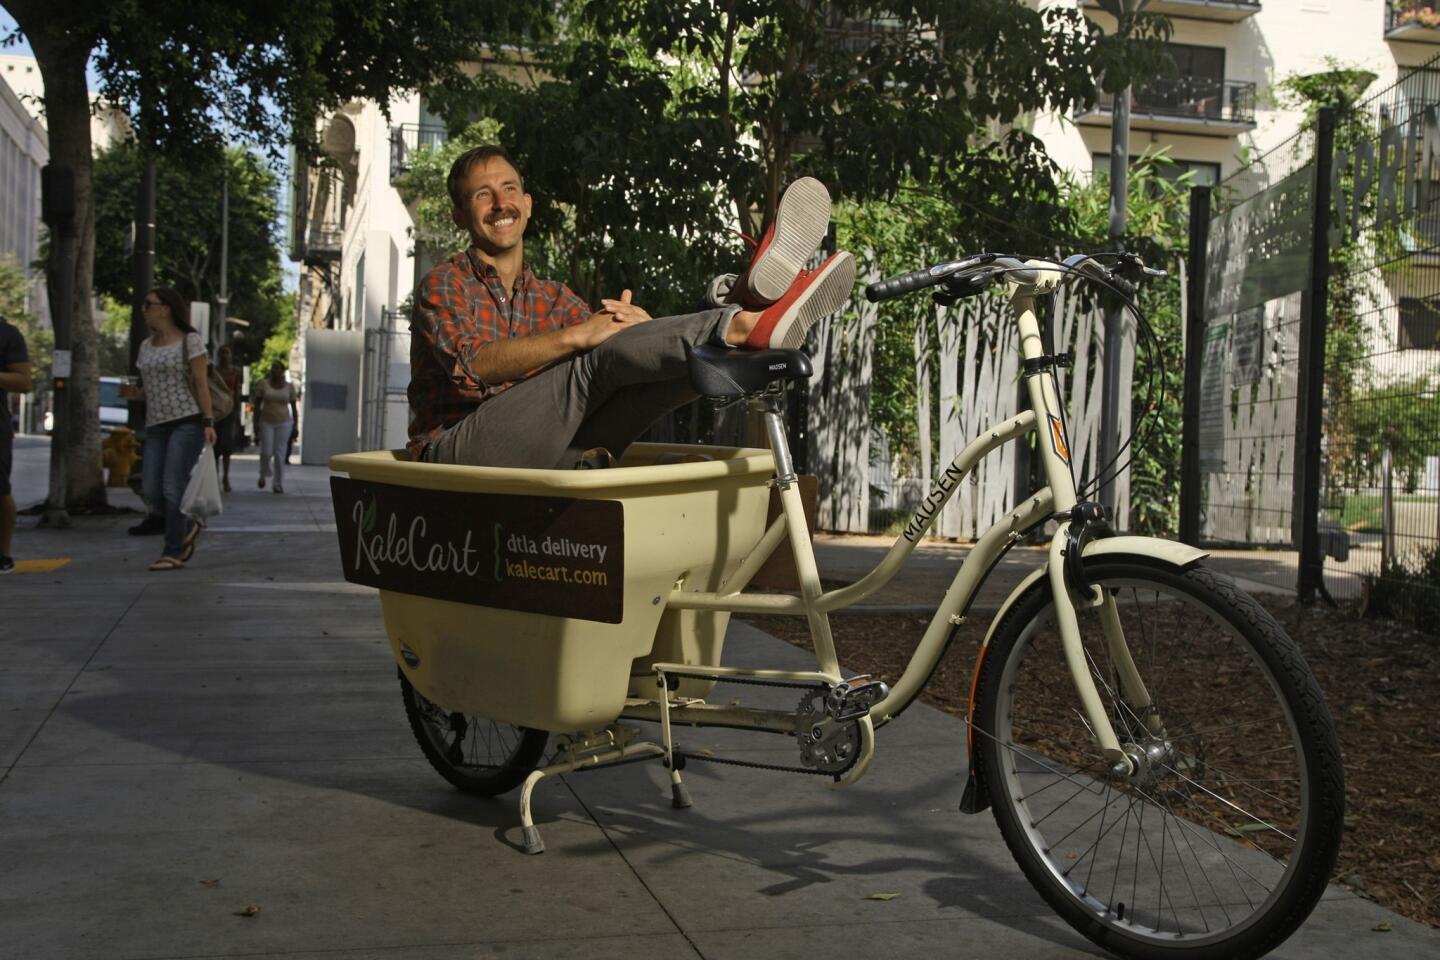 Ryan Matteson of Kale Cart uses a bike with trailer for deliveries in downtown L.A. The service relies solely on bicycles to bring customers their goods.